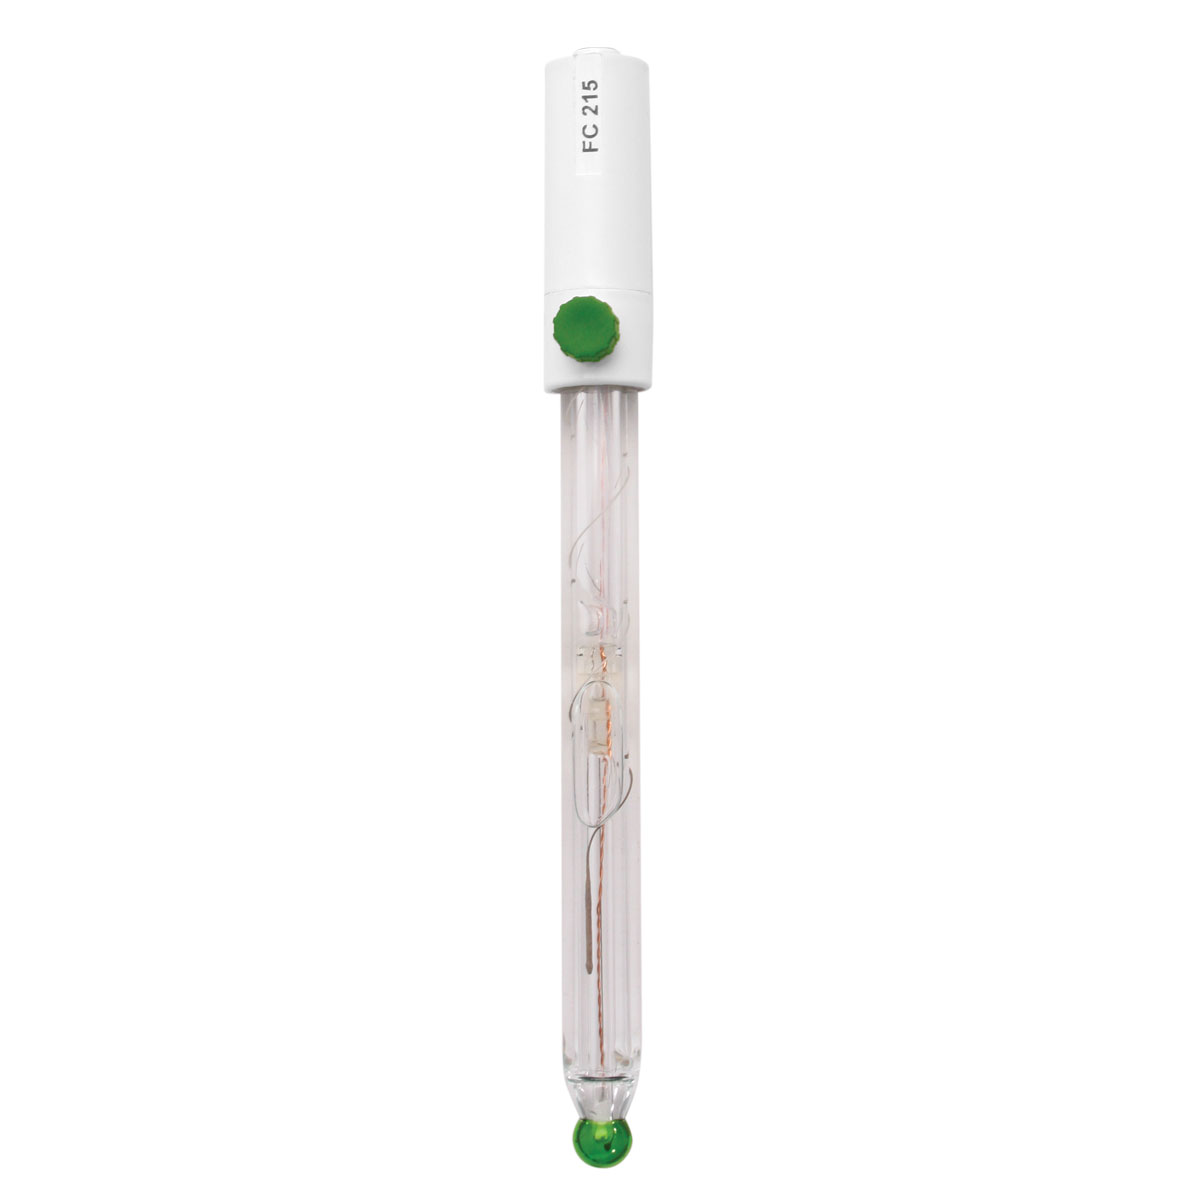 pH meter for Low Ionic Strength Water 